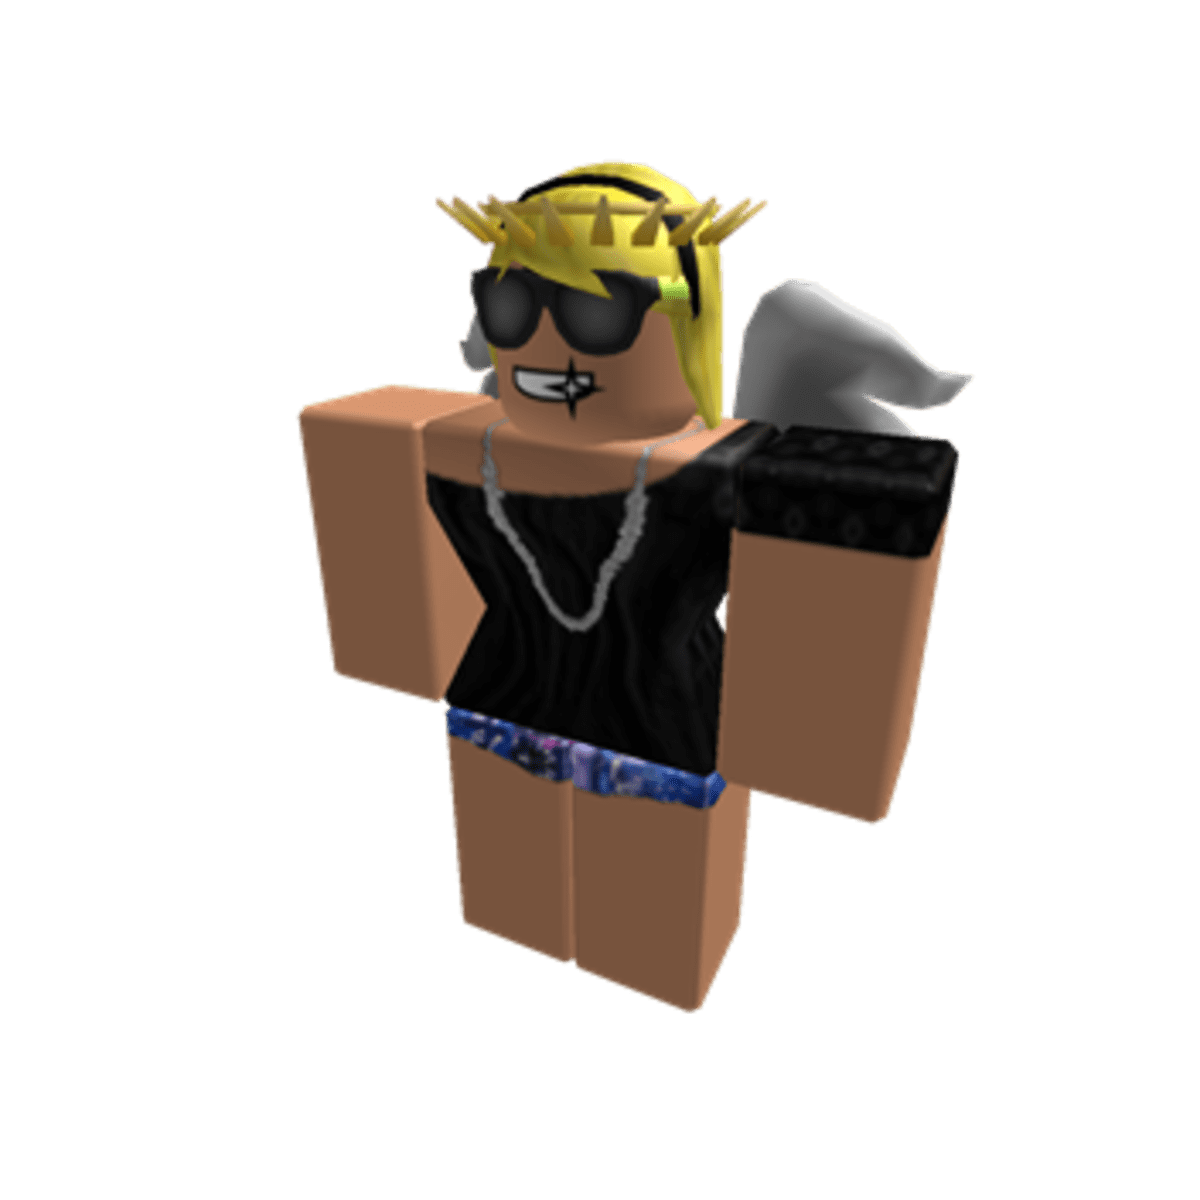 Banned on Roblox For 7 Days cause i Uploaded a shirt - Platform